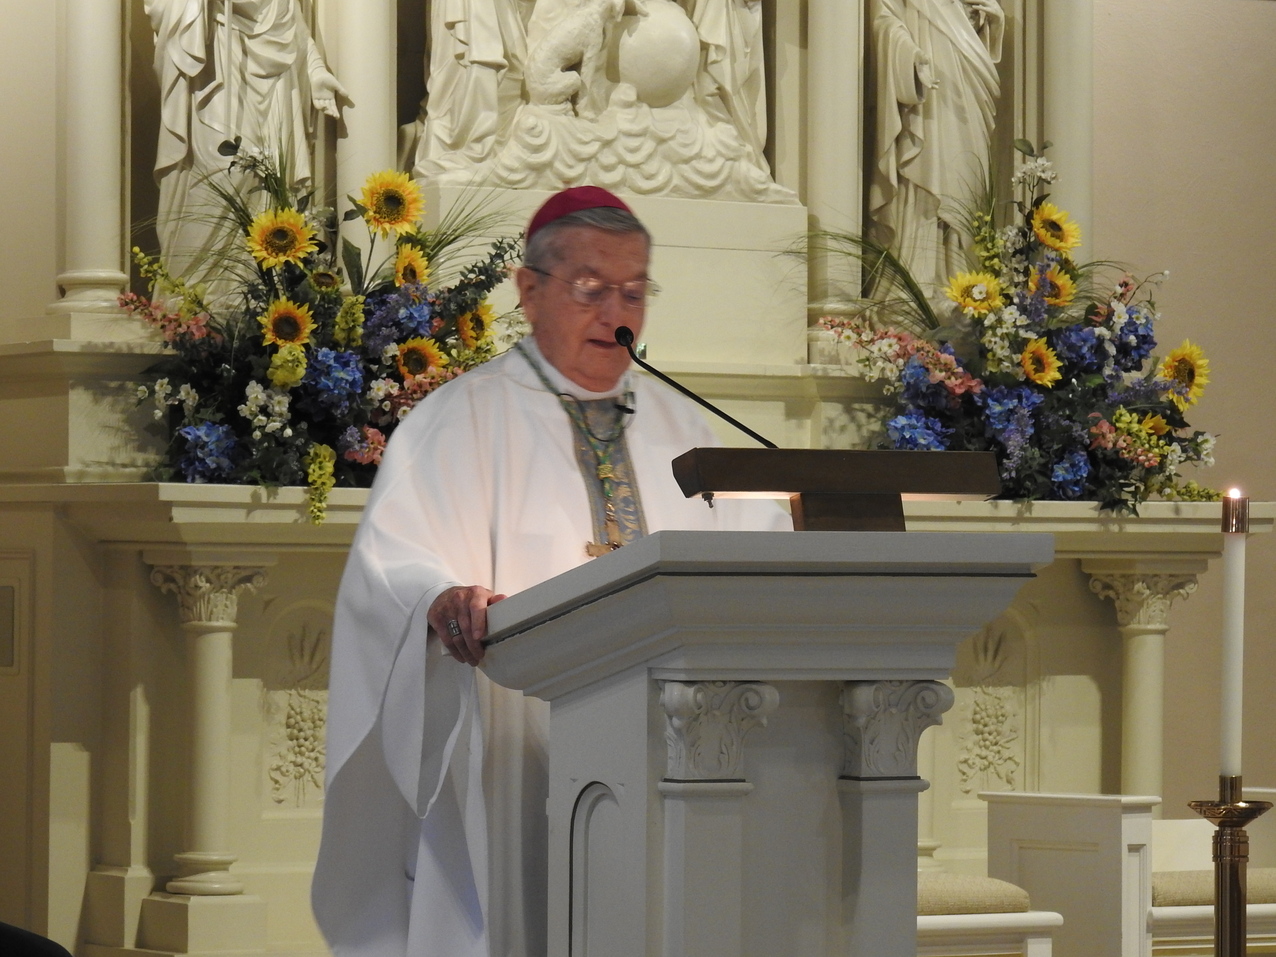 Bishop Malesic celebrates Mass, experiences his first ‘Feast’ in Cleveland